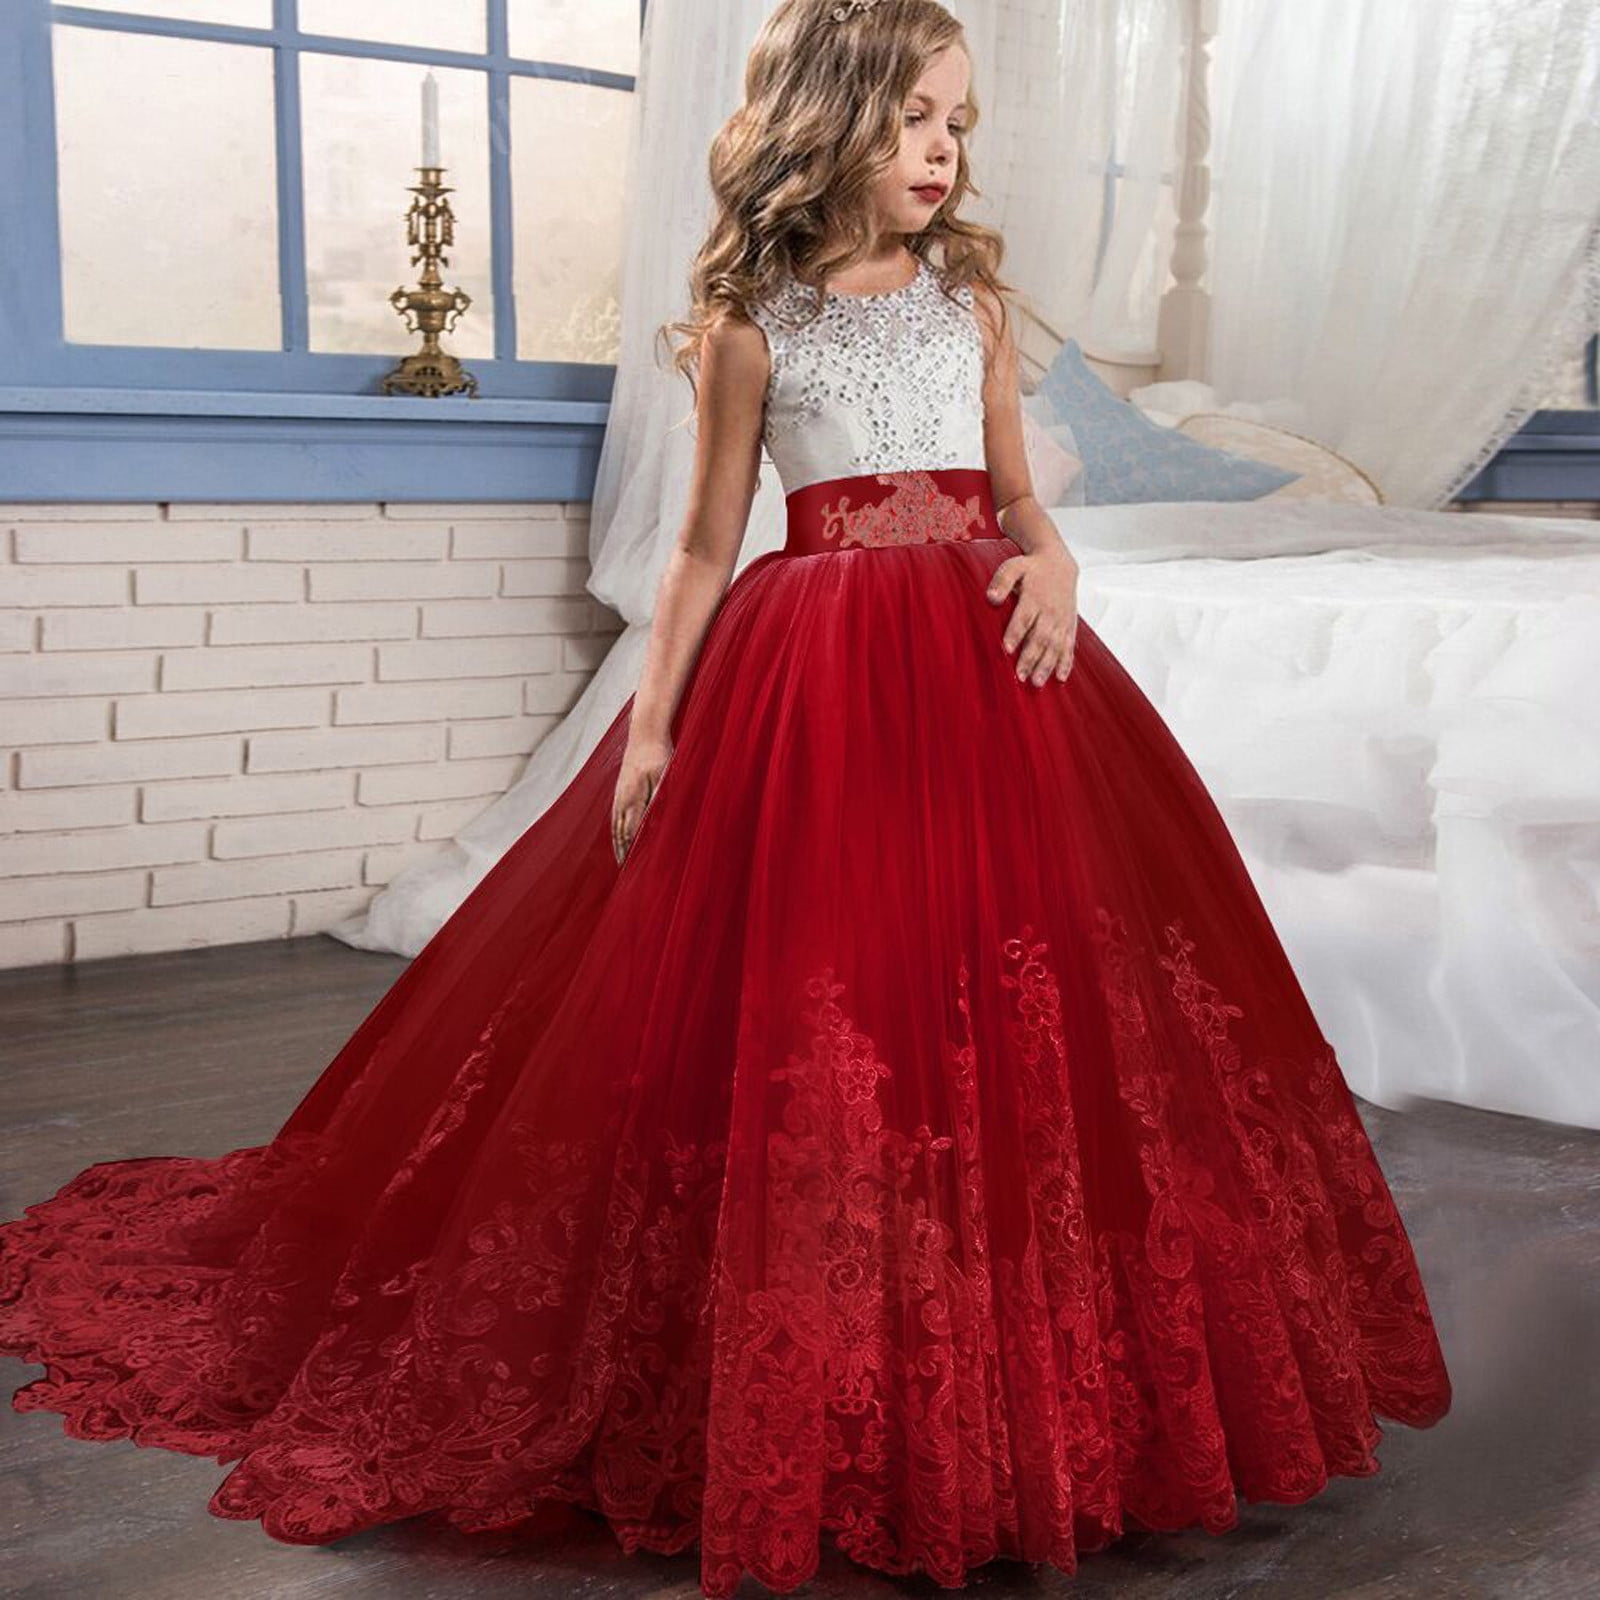 Red Puffy Quinceanera Dresses Ball Gown V-neck Off The Shoulder Party Prom  Gown | eBay